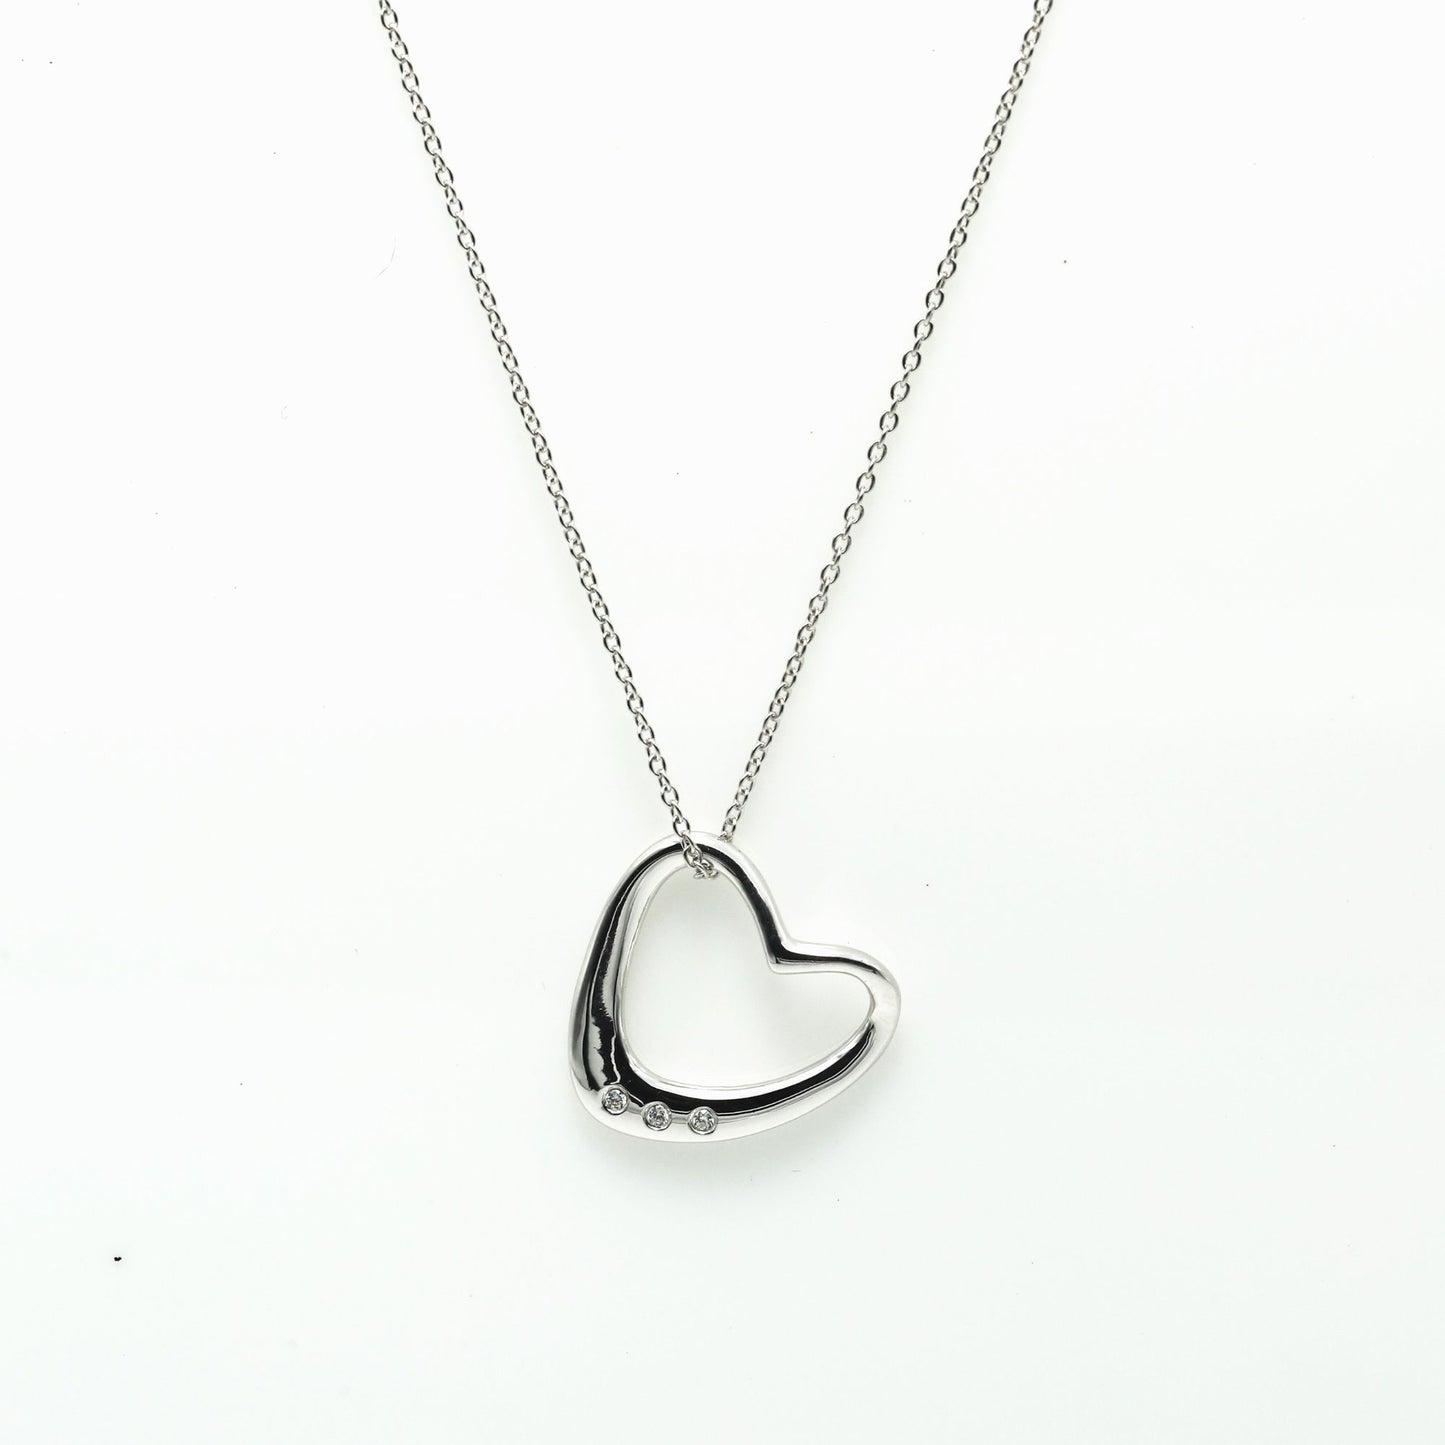 TILTED DREAM HEART NECKLACE - STERLING SILVER